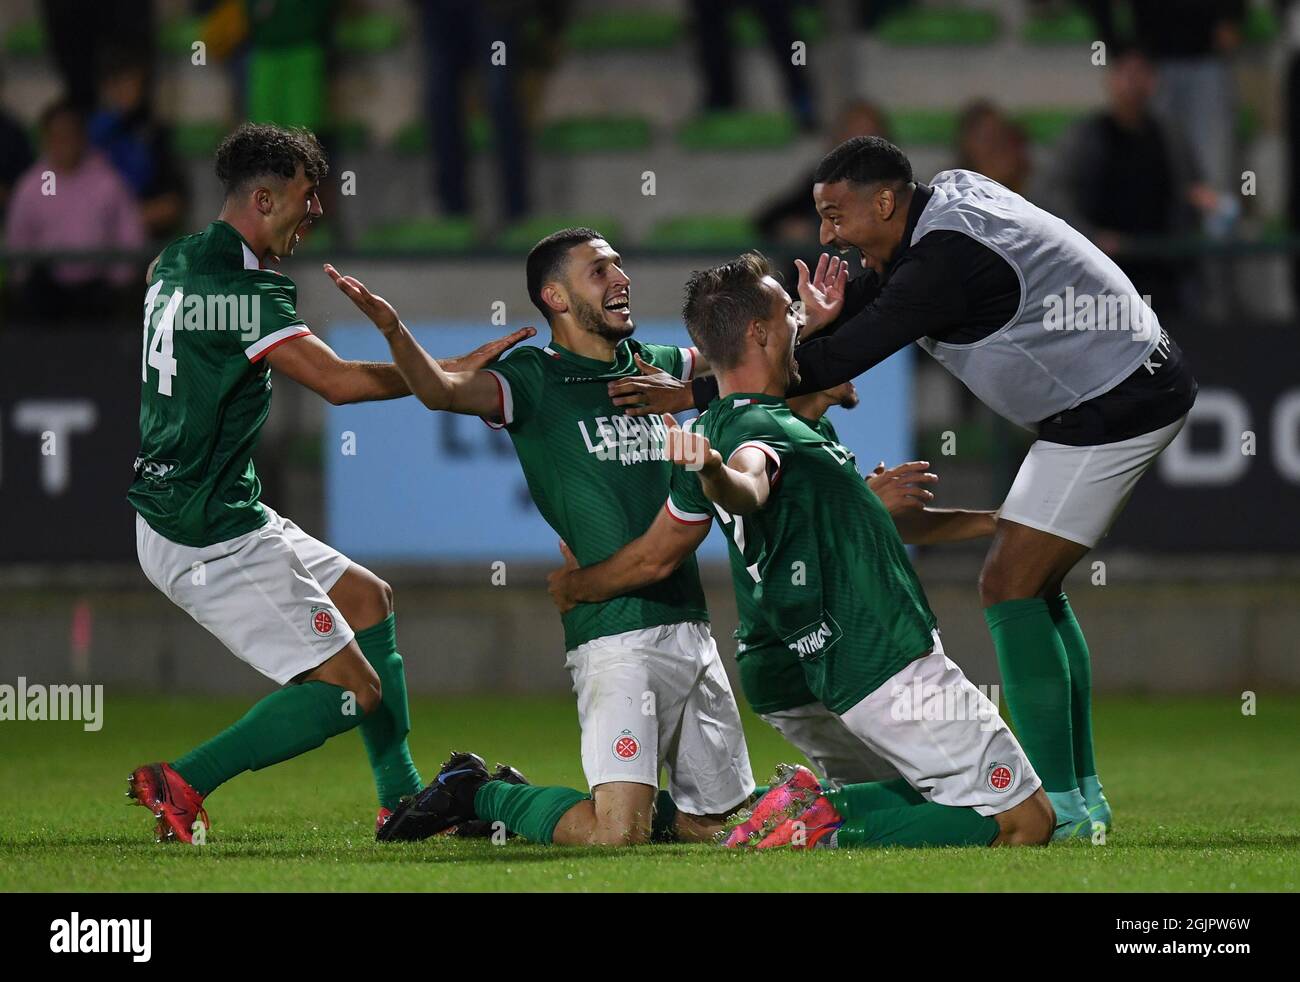 Virton's Ayyoub Allach celebrates after scoring during a soccer match between Royal Excelsior Virton and Lommel SK, Saturday 11 September 2021 in Virt Stock Photo